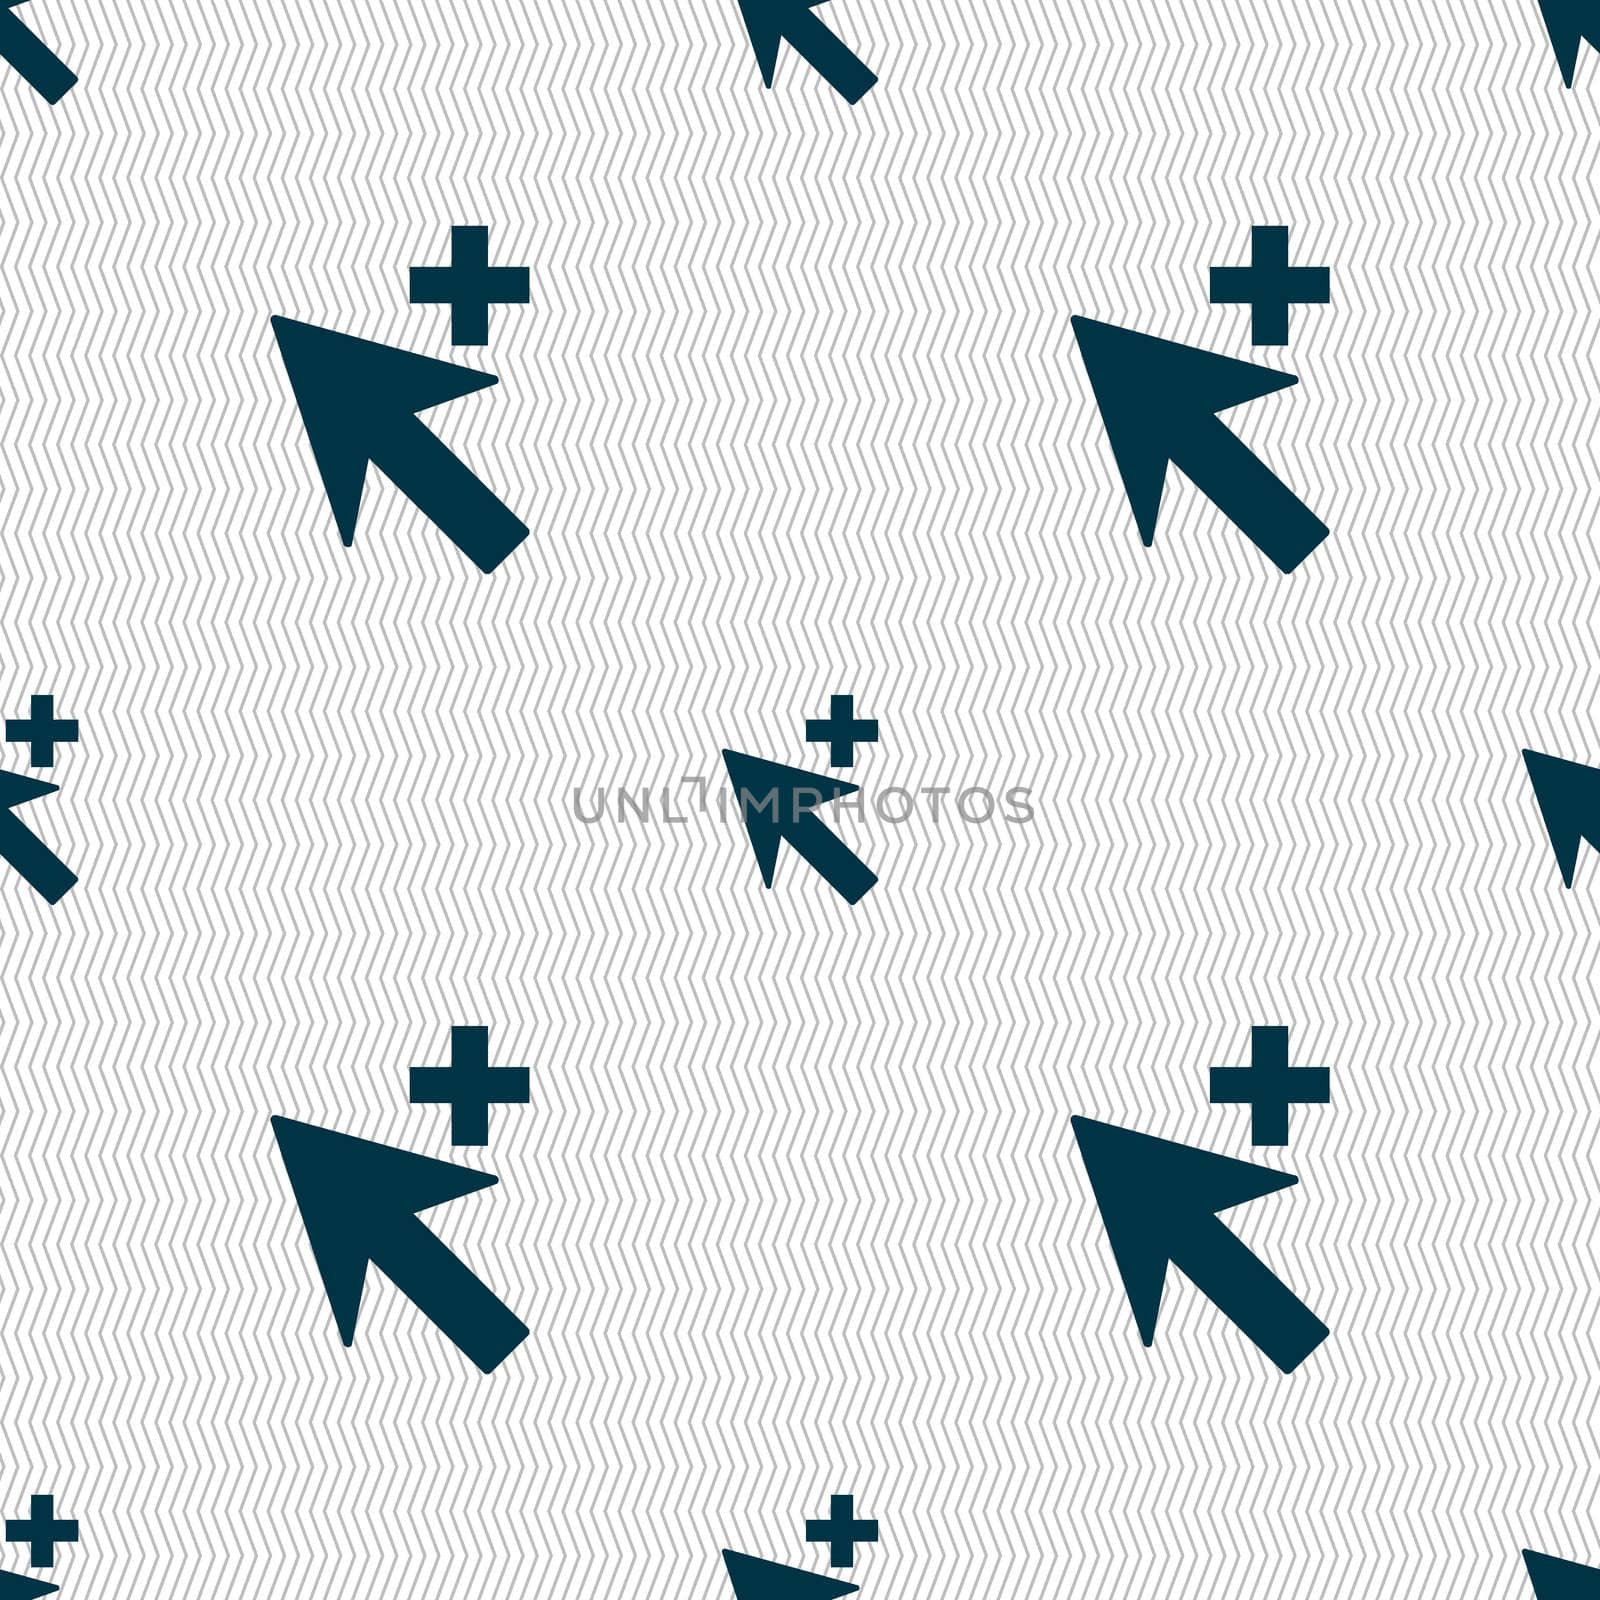 Cursor, arrow plus, add icon sign. Seamless abstract background with geometric shapes. illustration